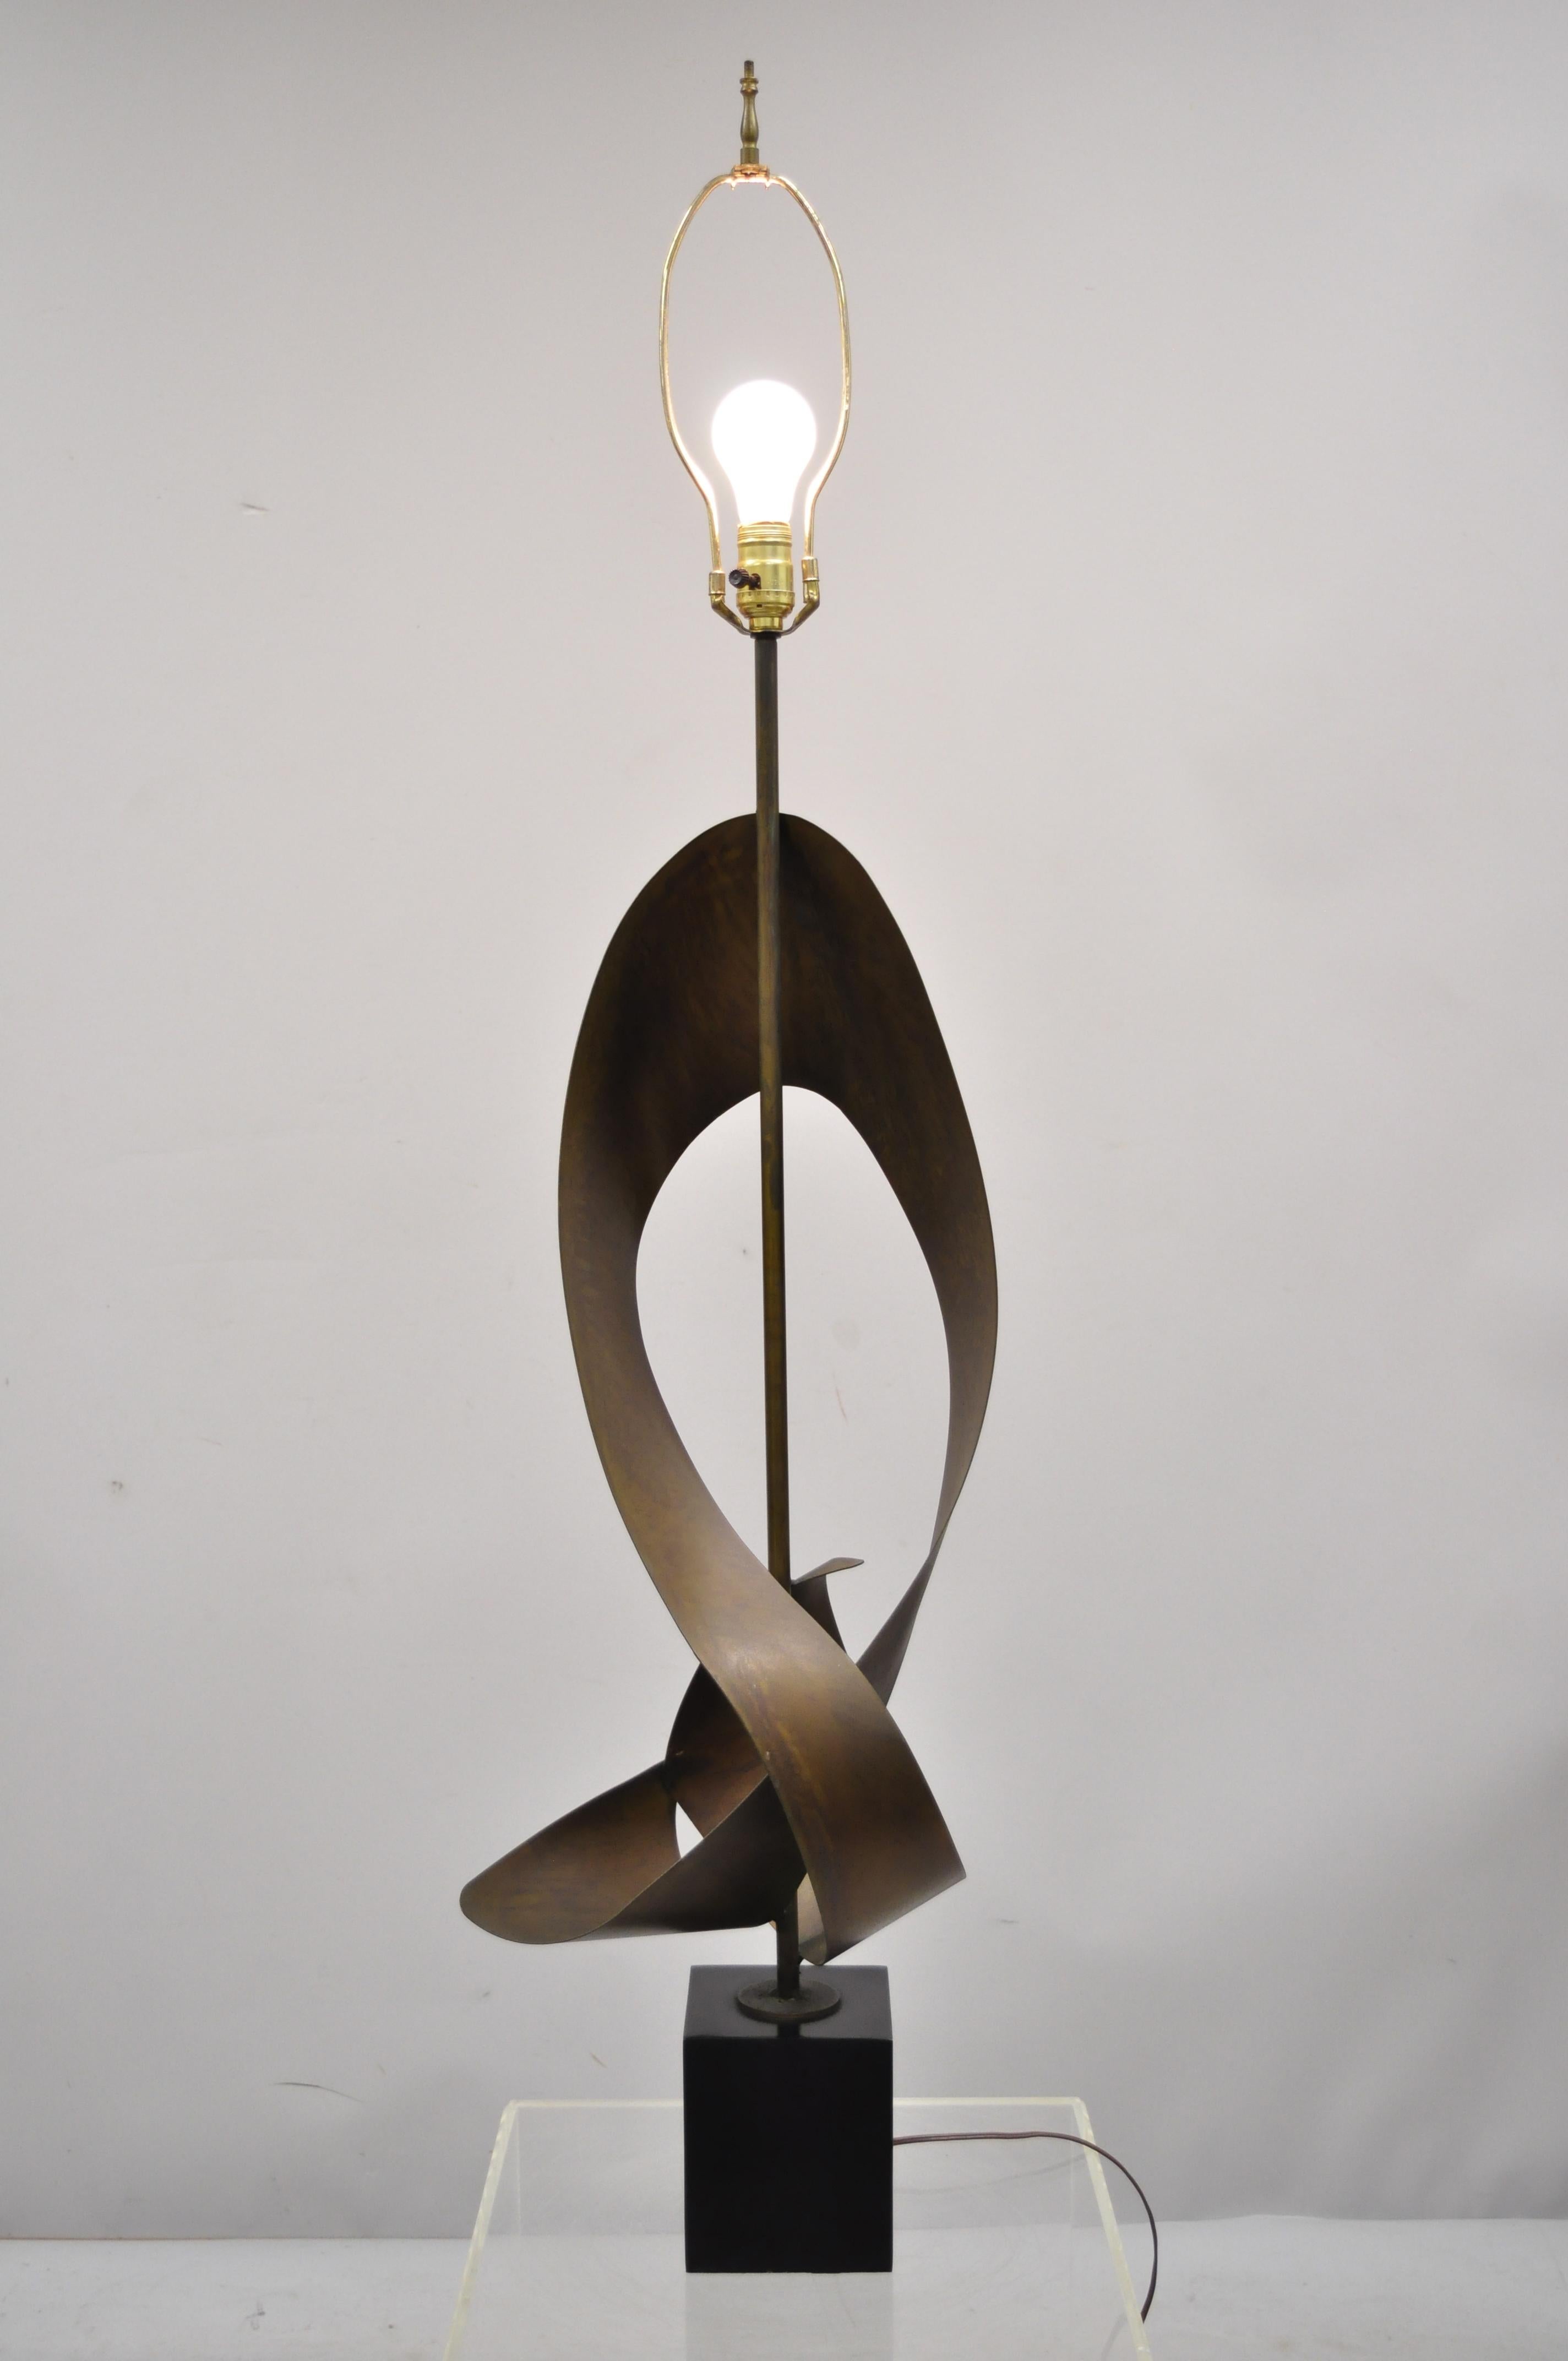 Large Brutalist Harry Balmer Mid-Century Modern Ribbon table lamp for Laurel. Item includes a sculptural metal form, wooden base, very nice vintage item, circa mid-20th century. Measurements: 53